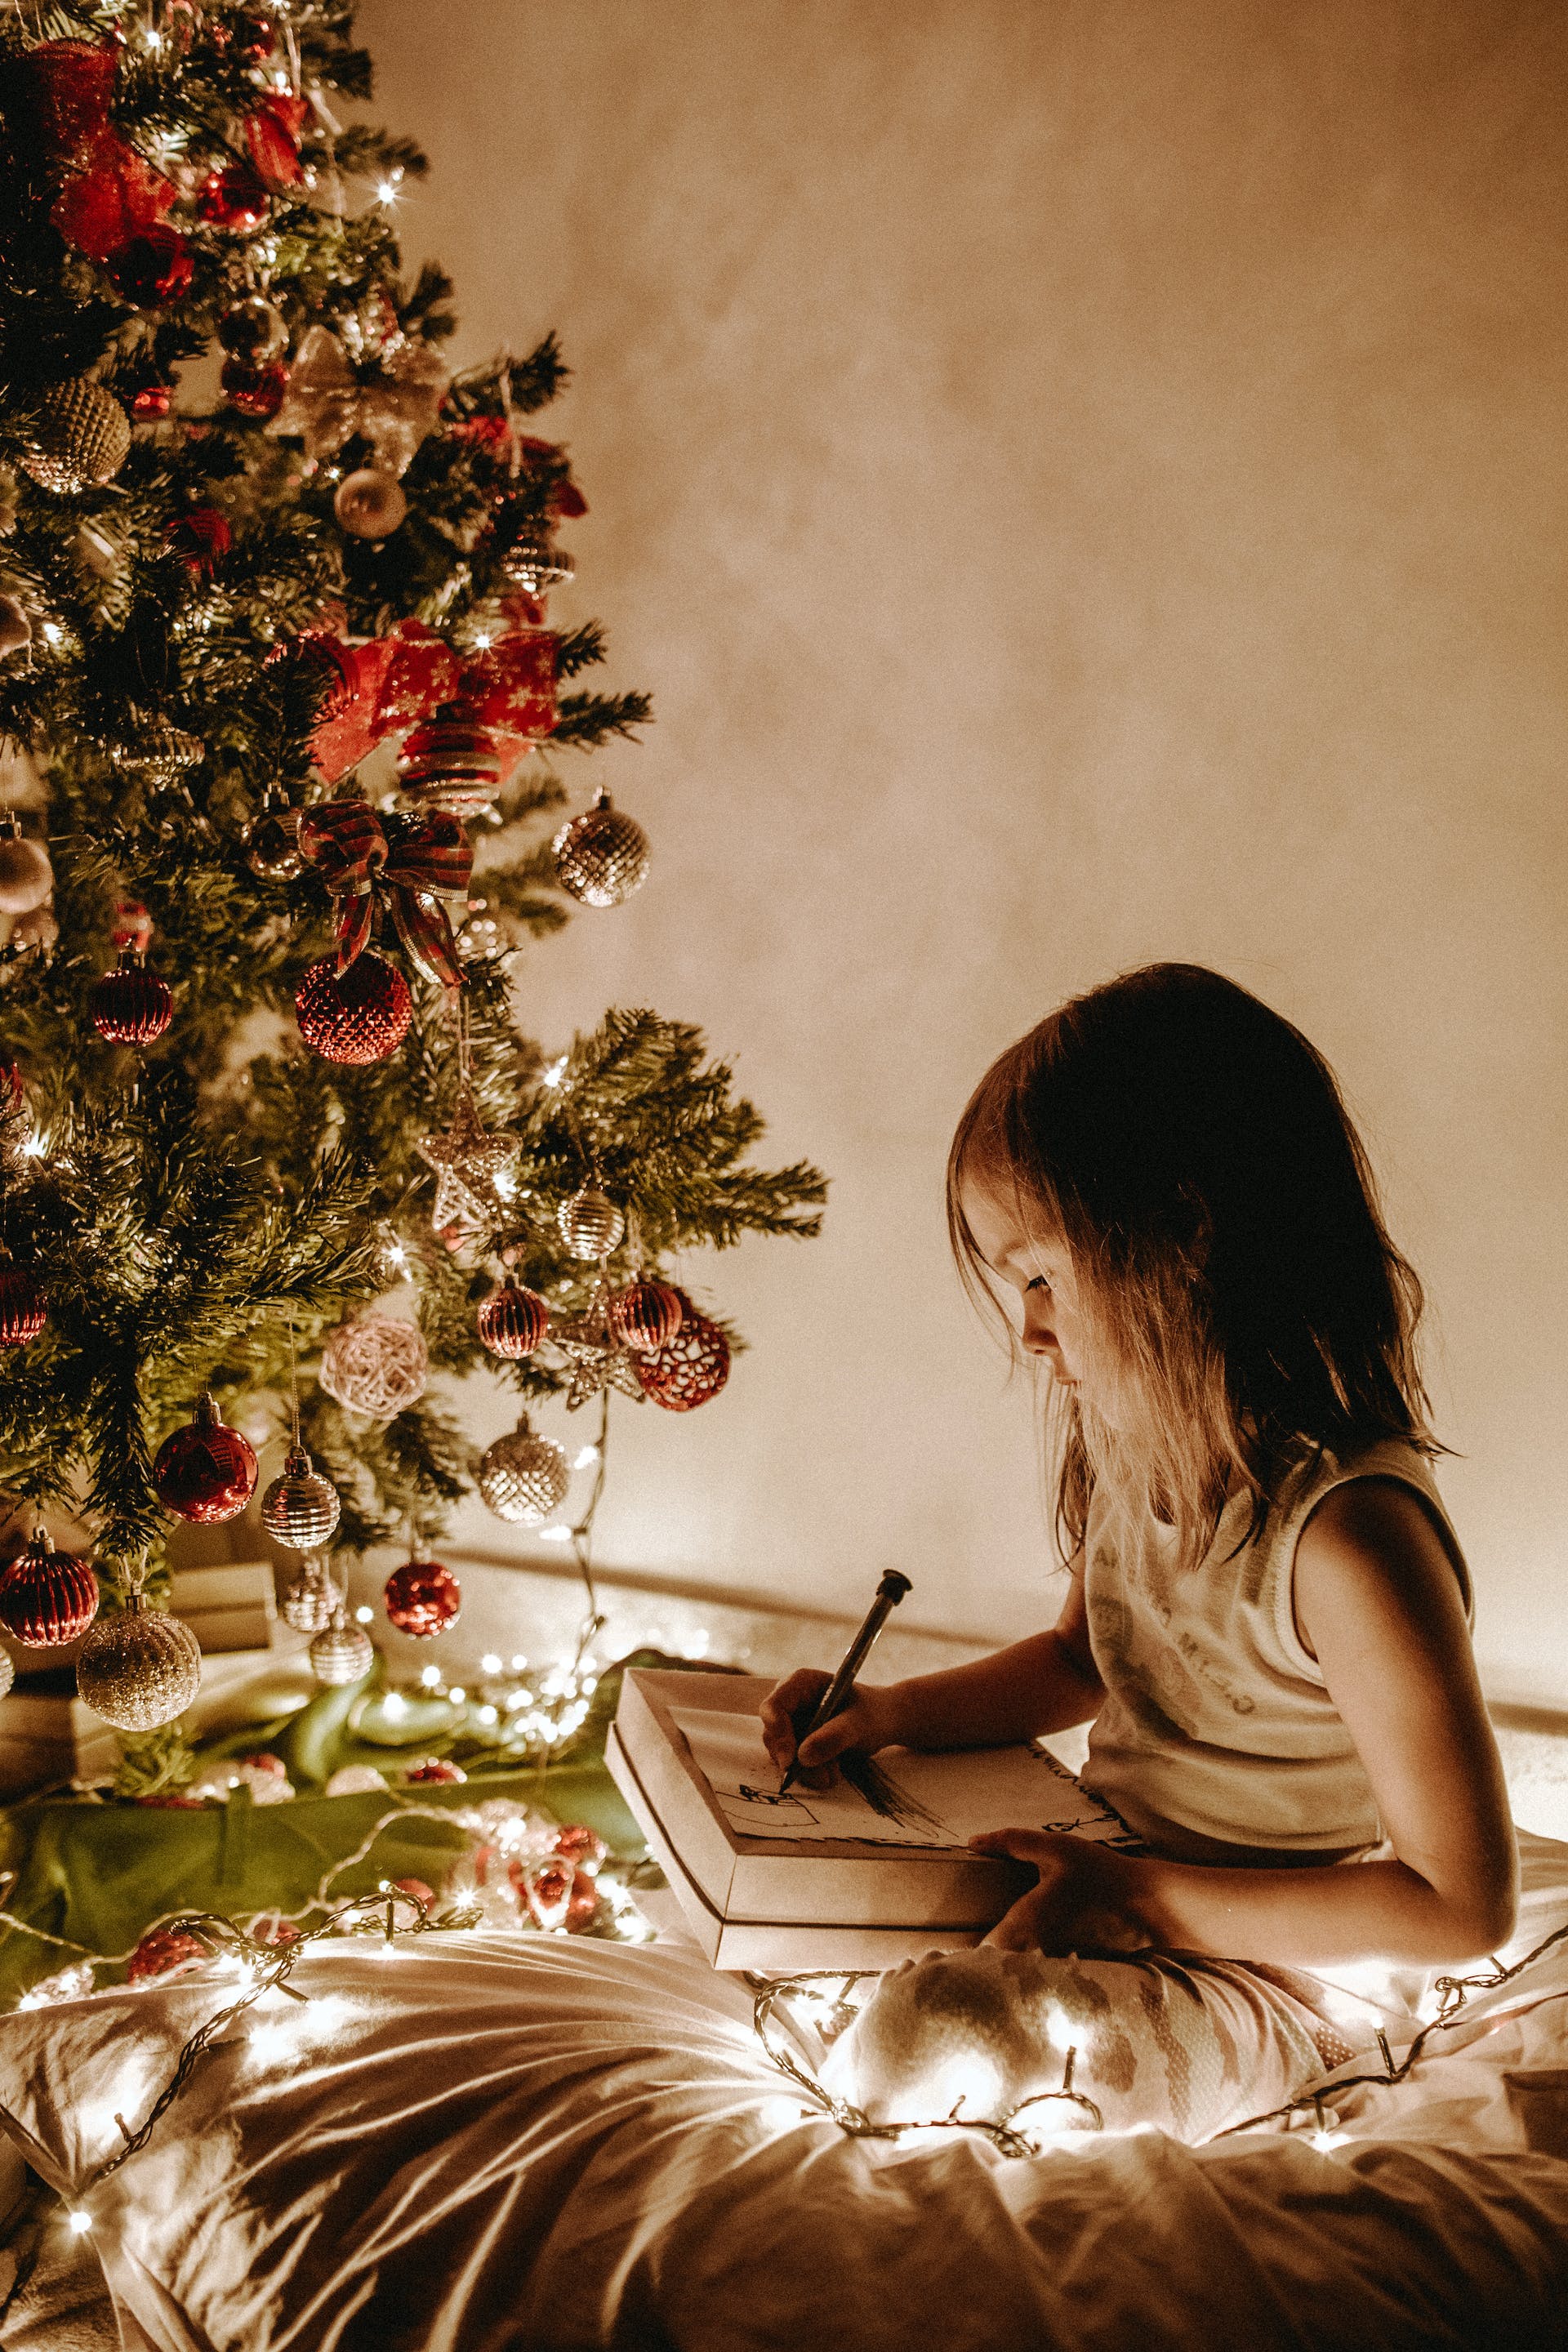 A little girl sitting near a Christmas tree | Source: Pexels